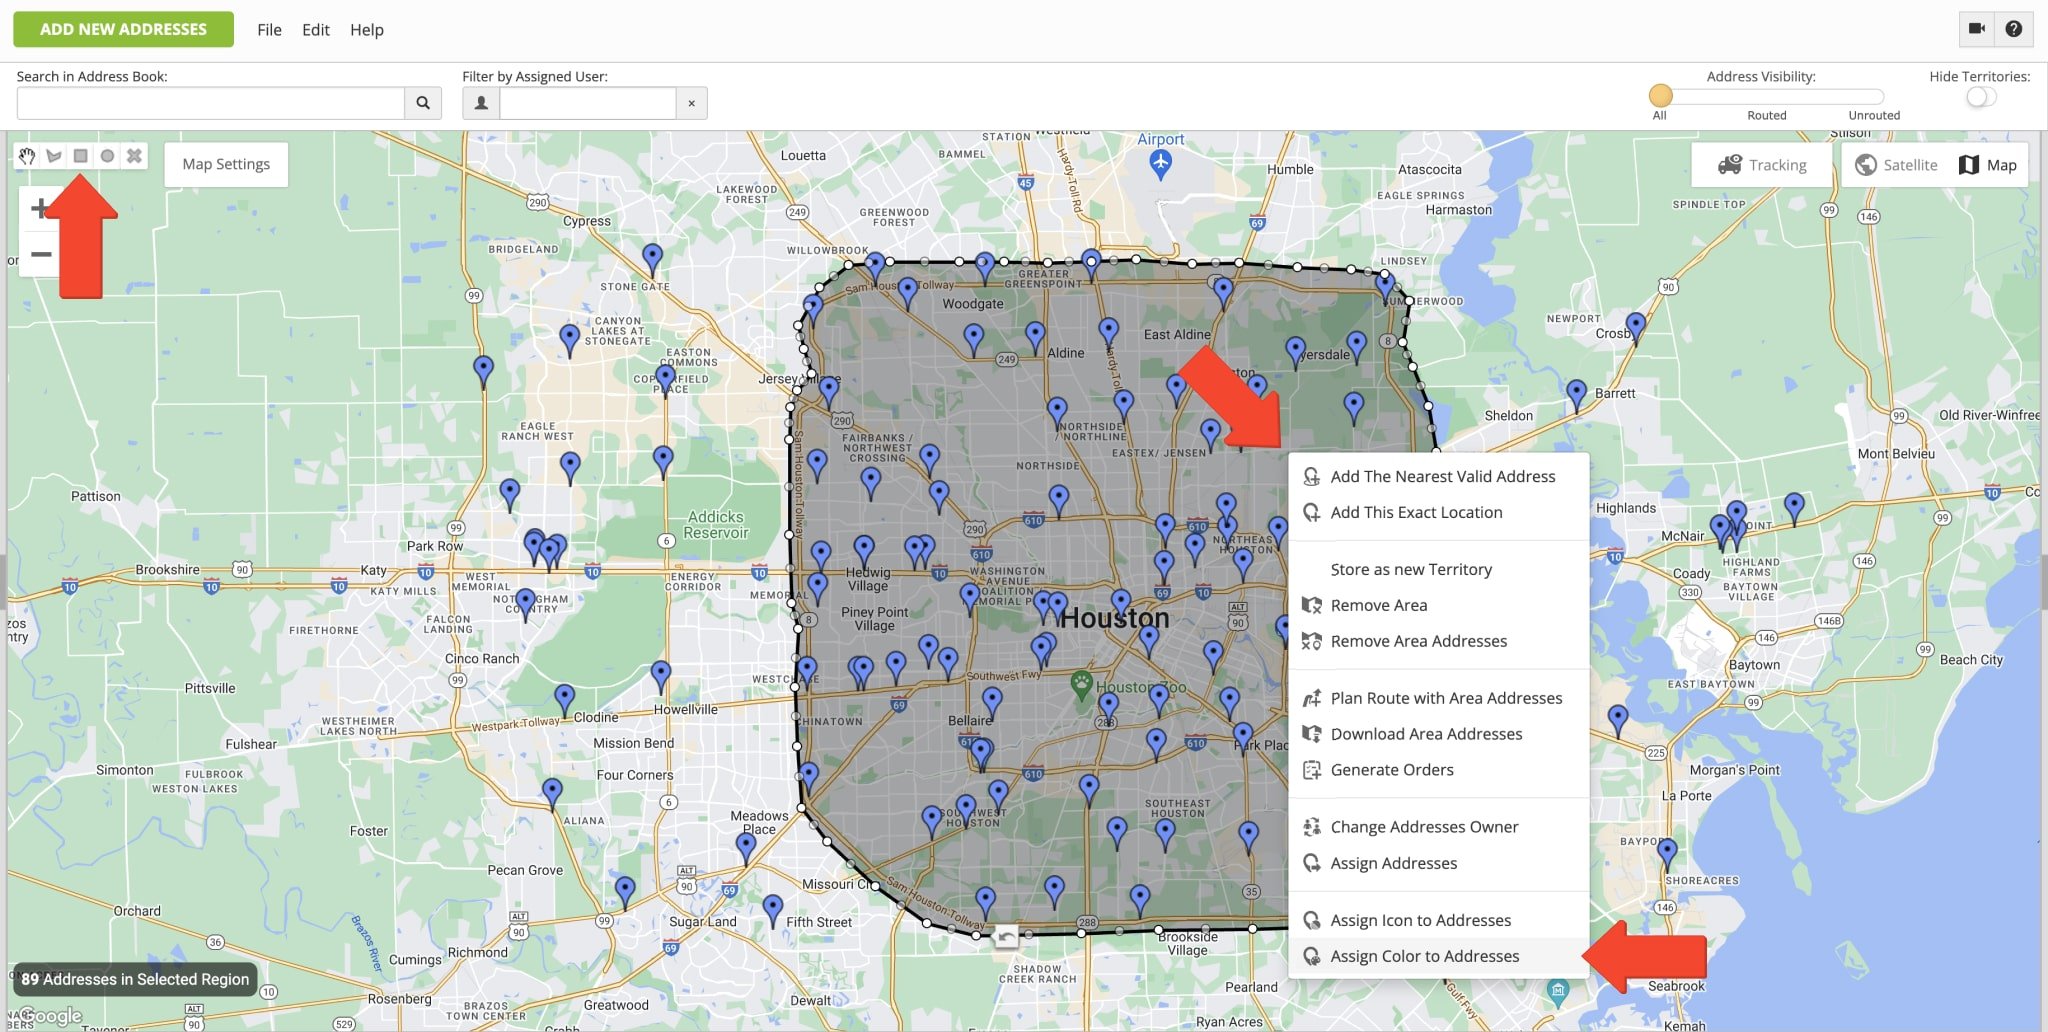 Assign color and icons to customer locations and addresses on the Synchronized Address Book Map.